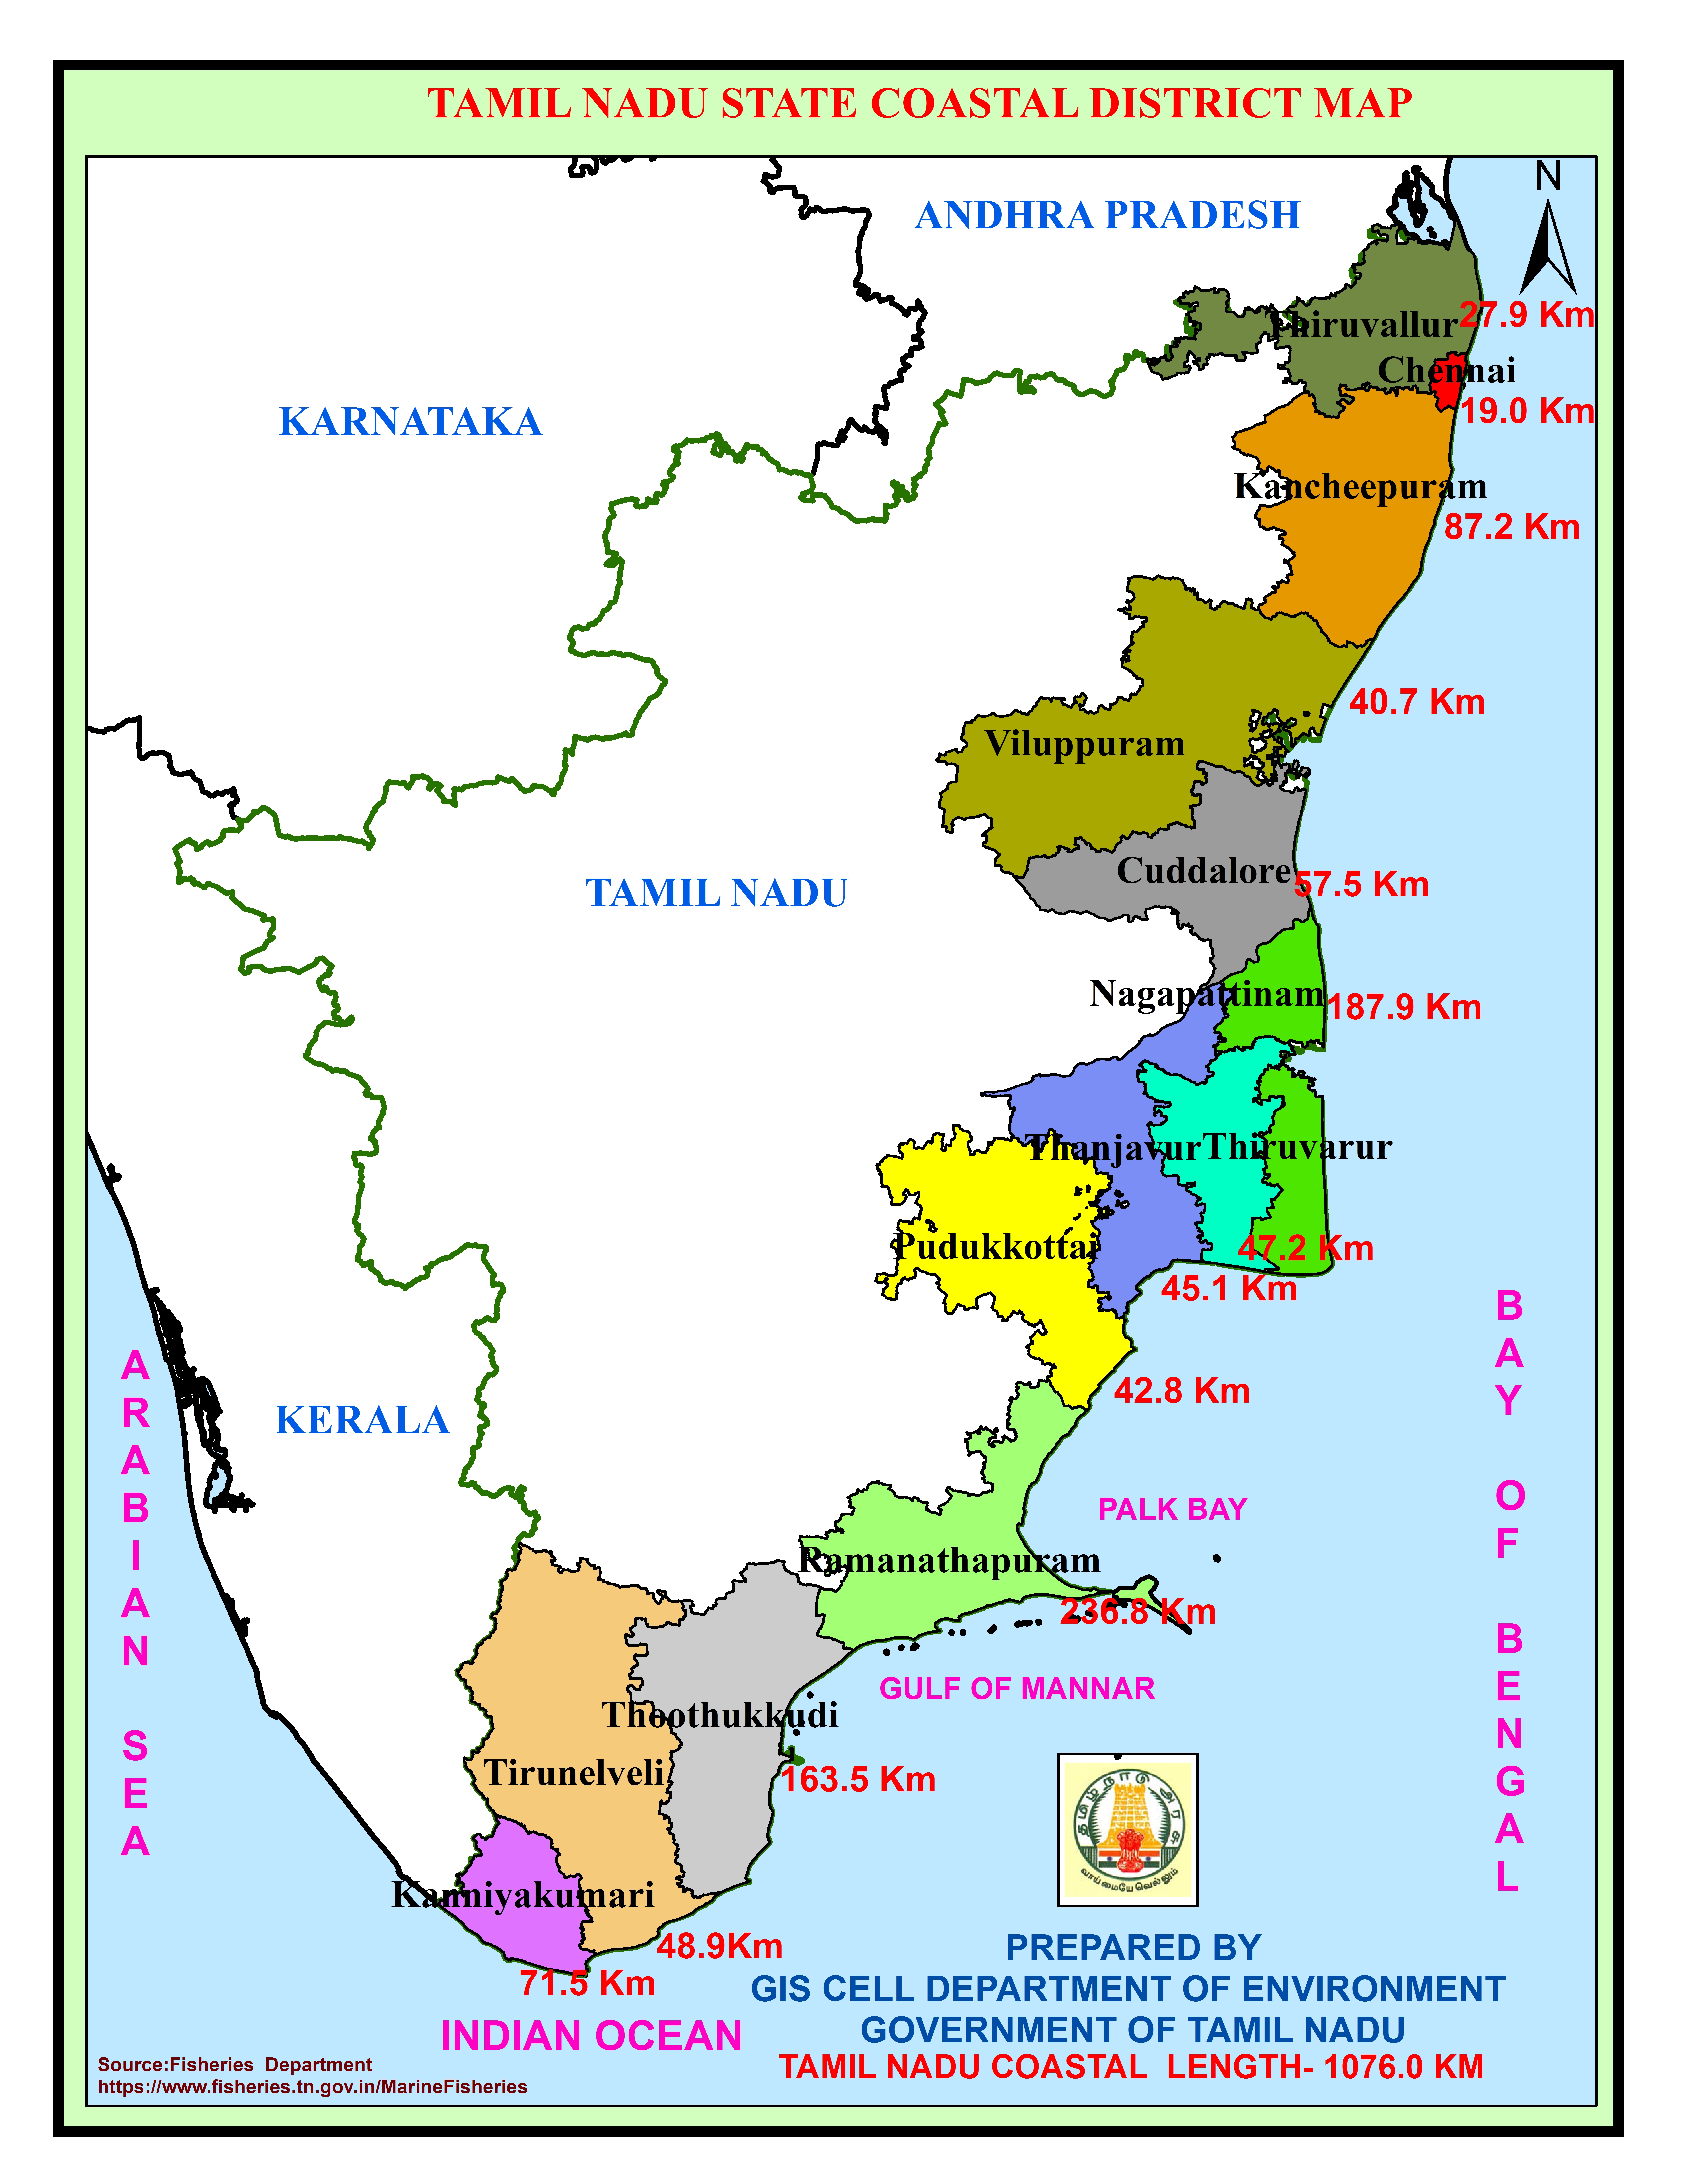 Government of Tamil Nadu Department of